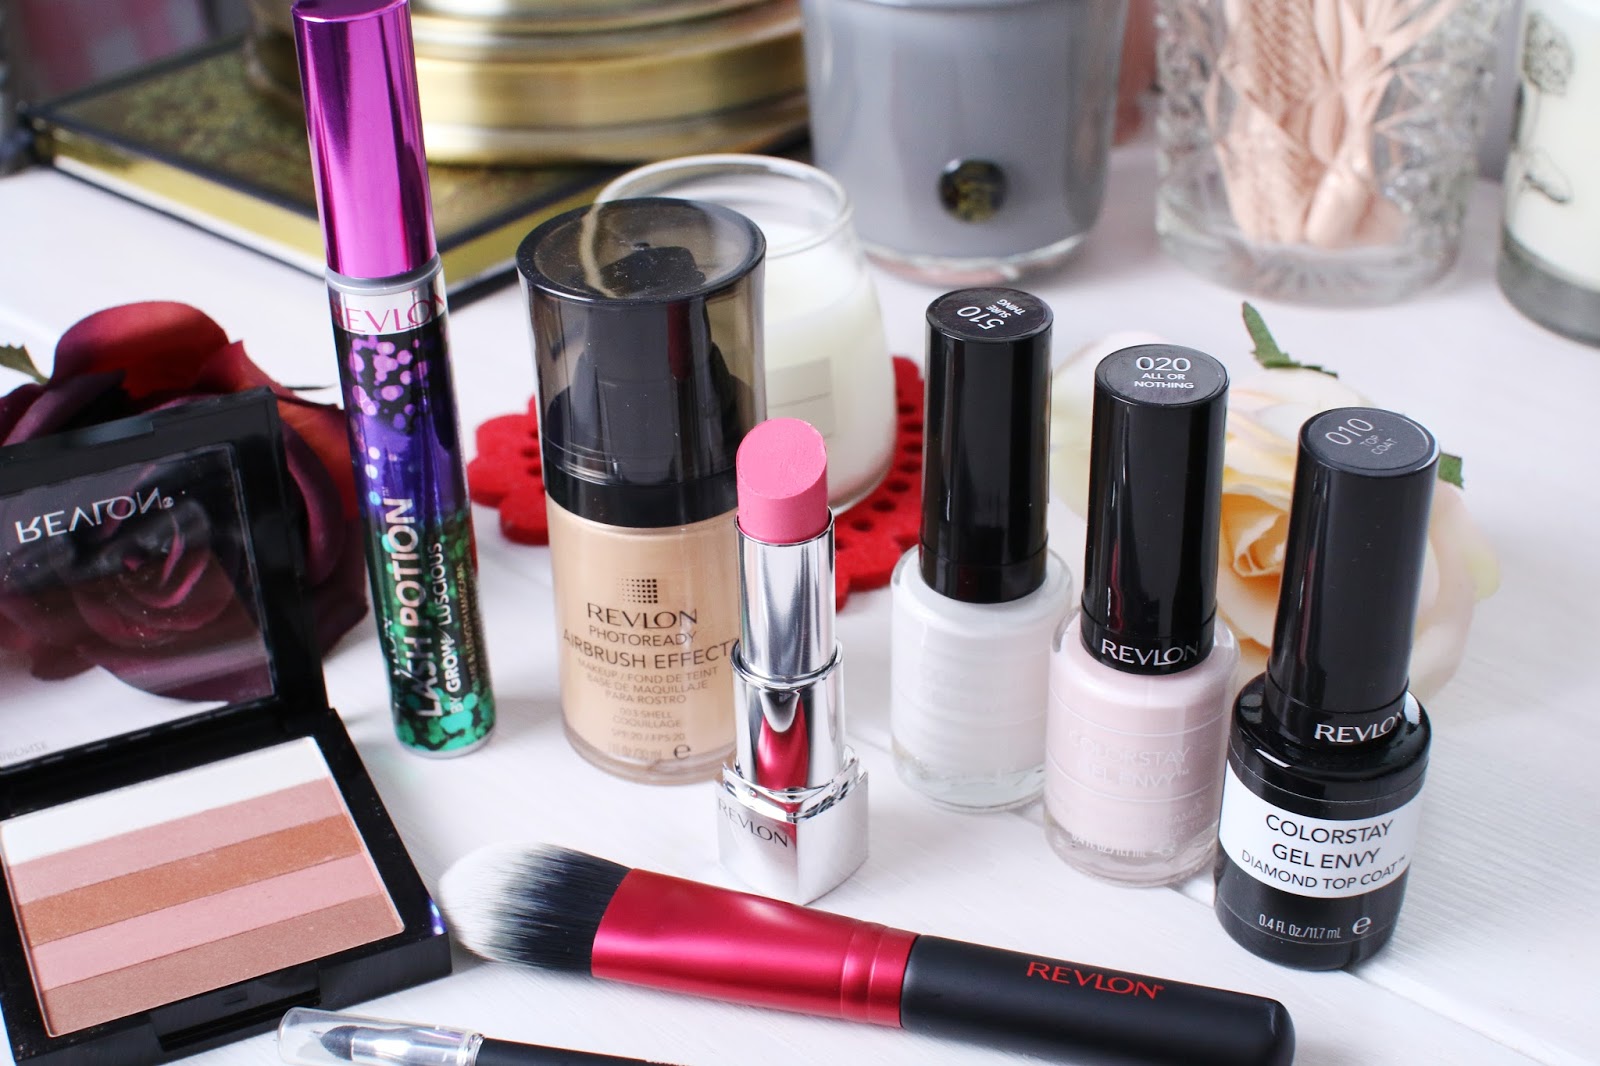 Discovering Revlon: A Full Face of First Impressions